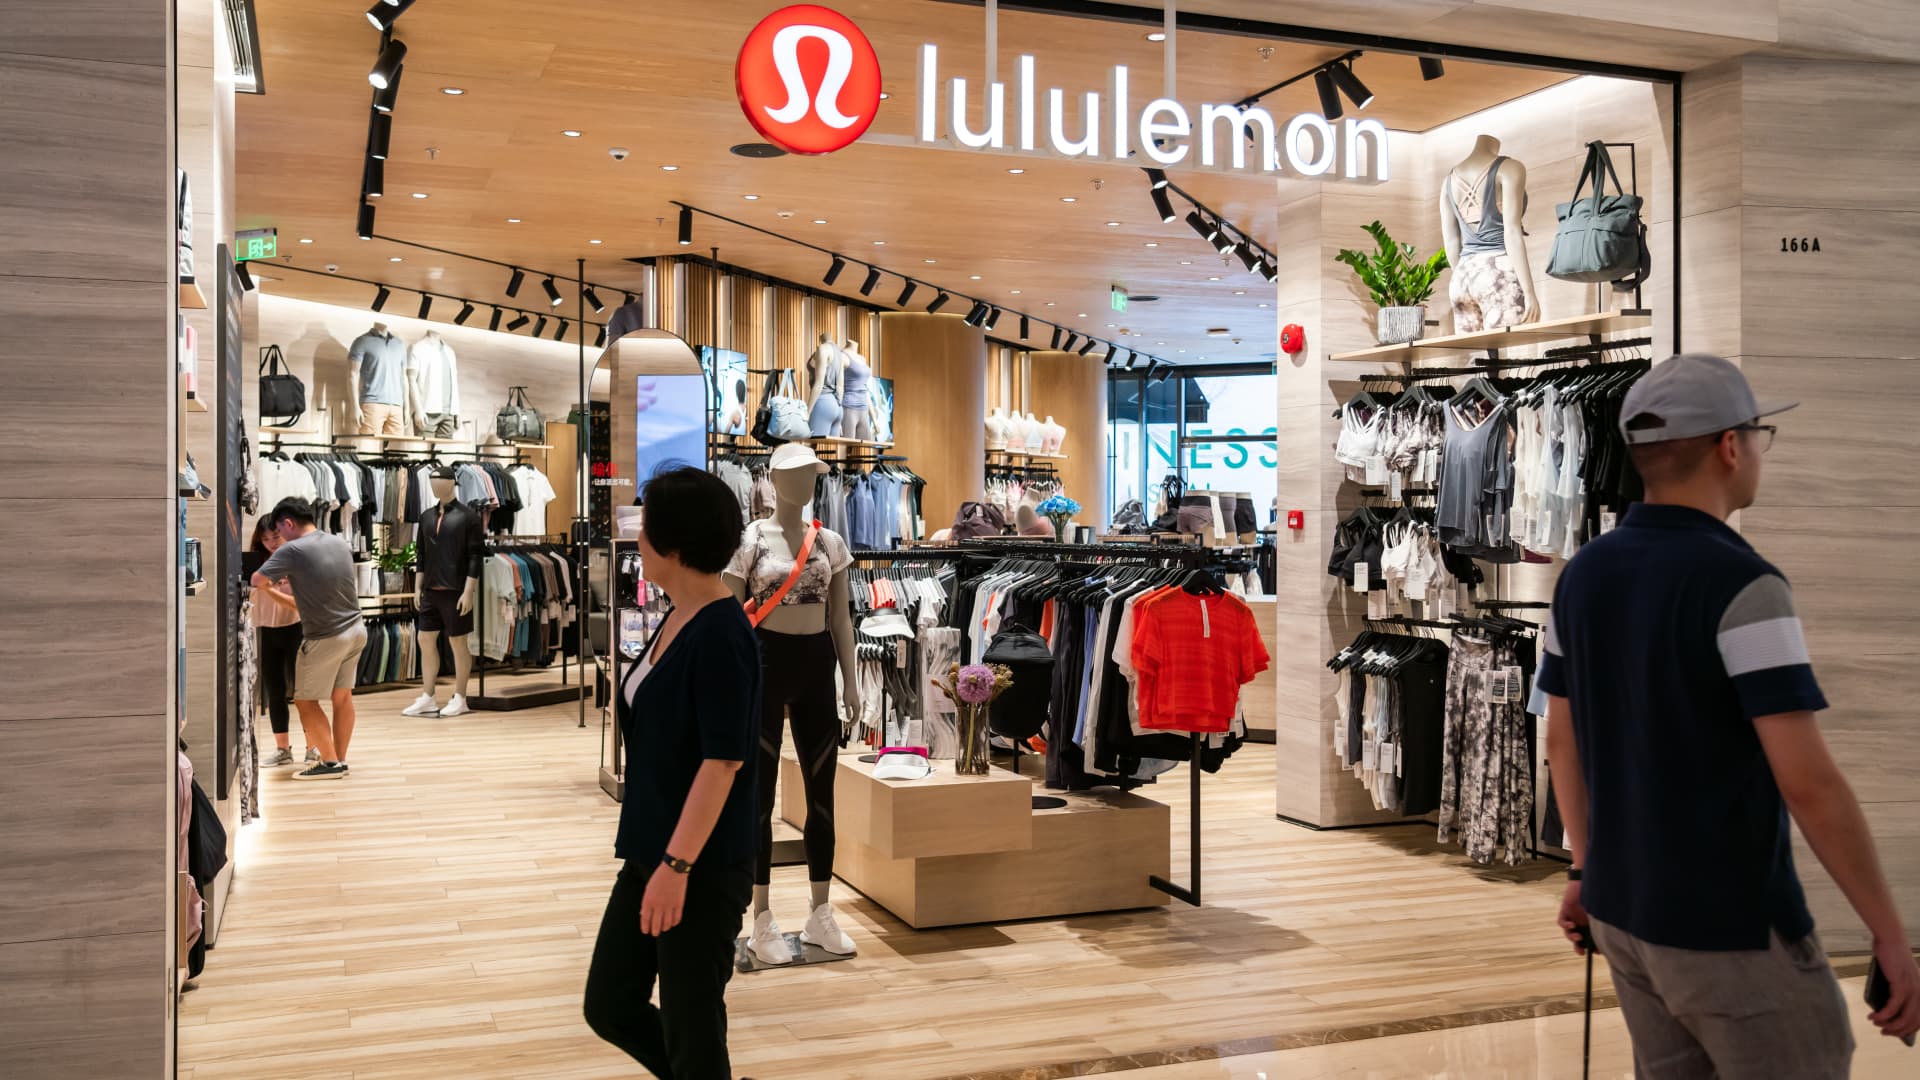 BEST LULULEMON STORE IN AUS!! 🇦🇺, Gallery posted by Nad